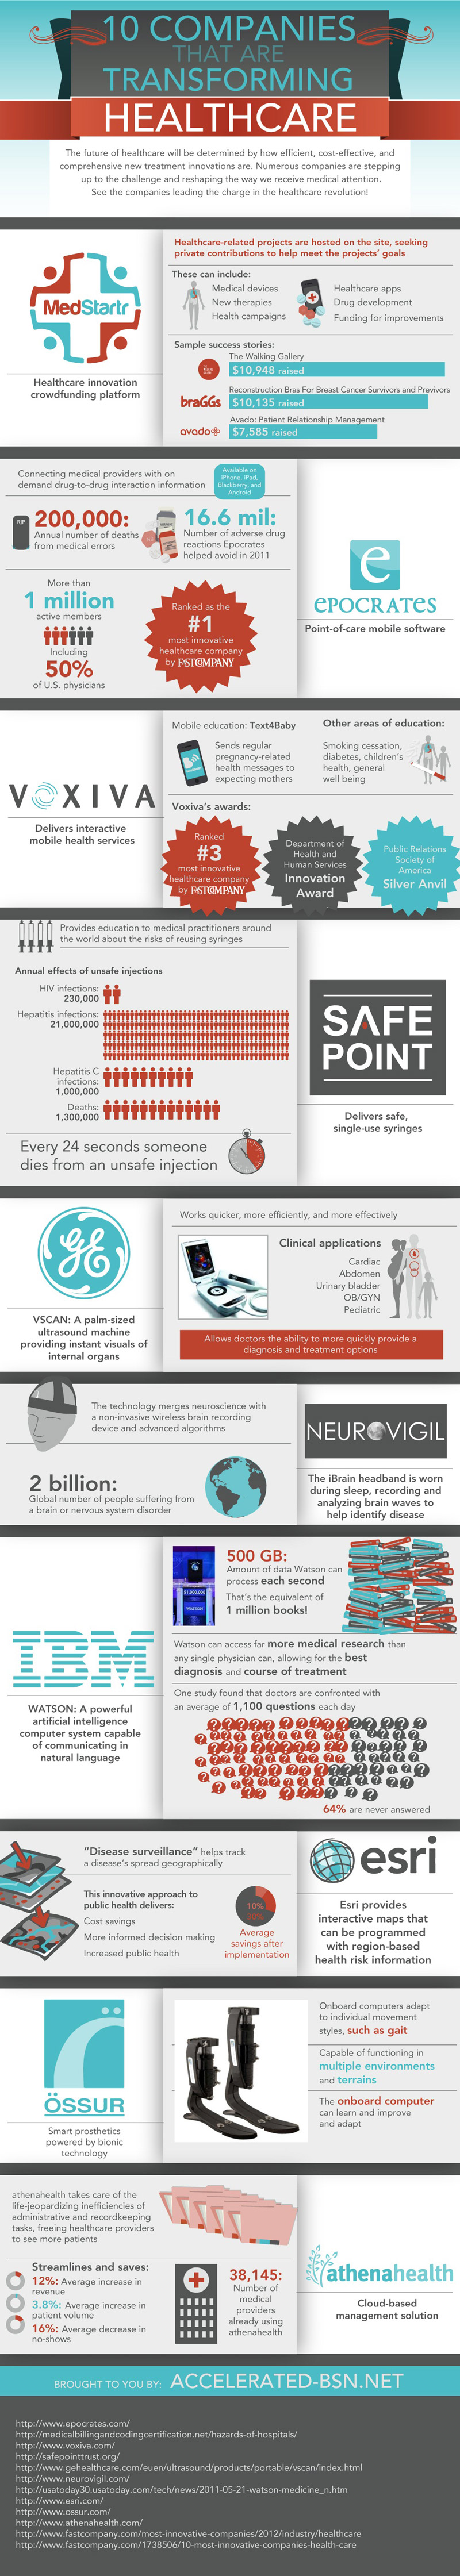 Healthcare solutions infographic